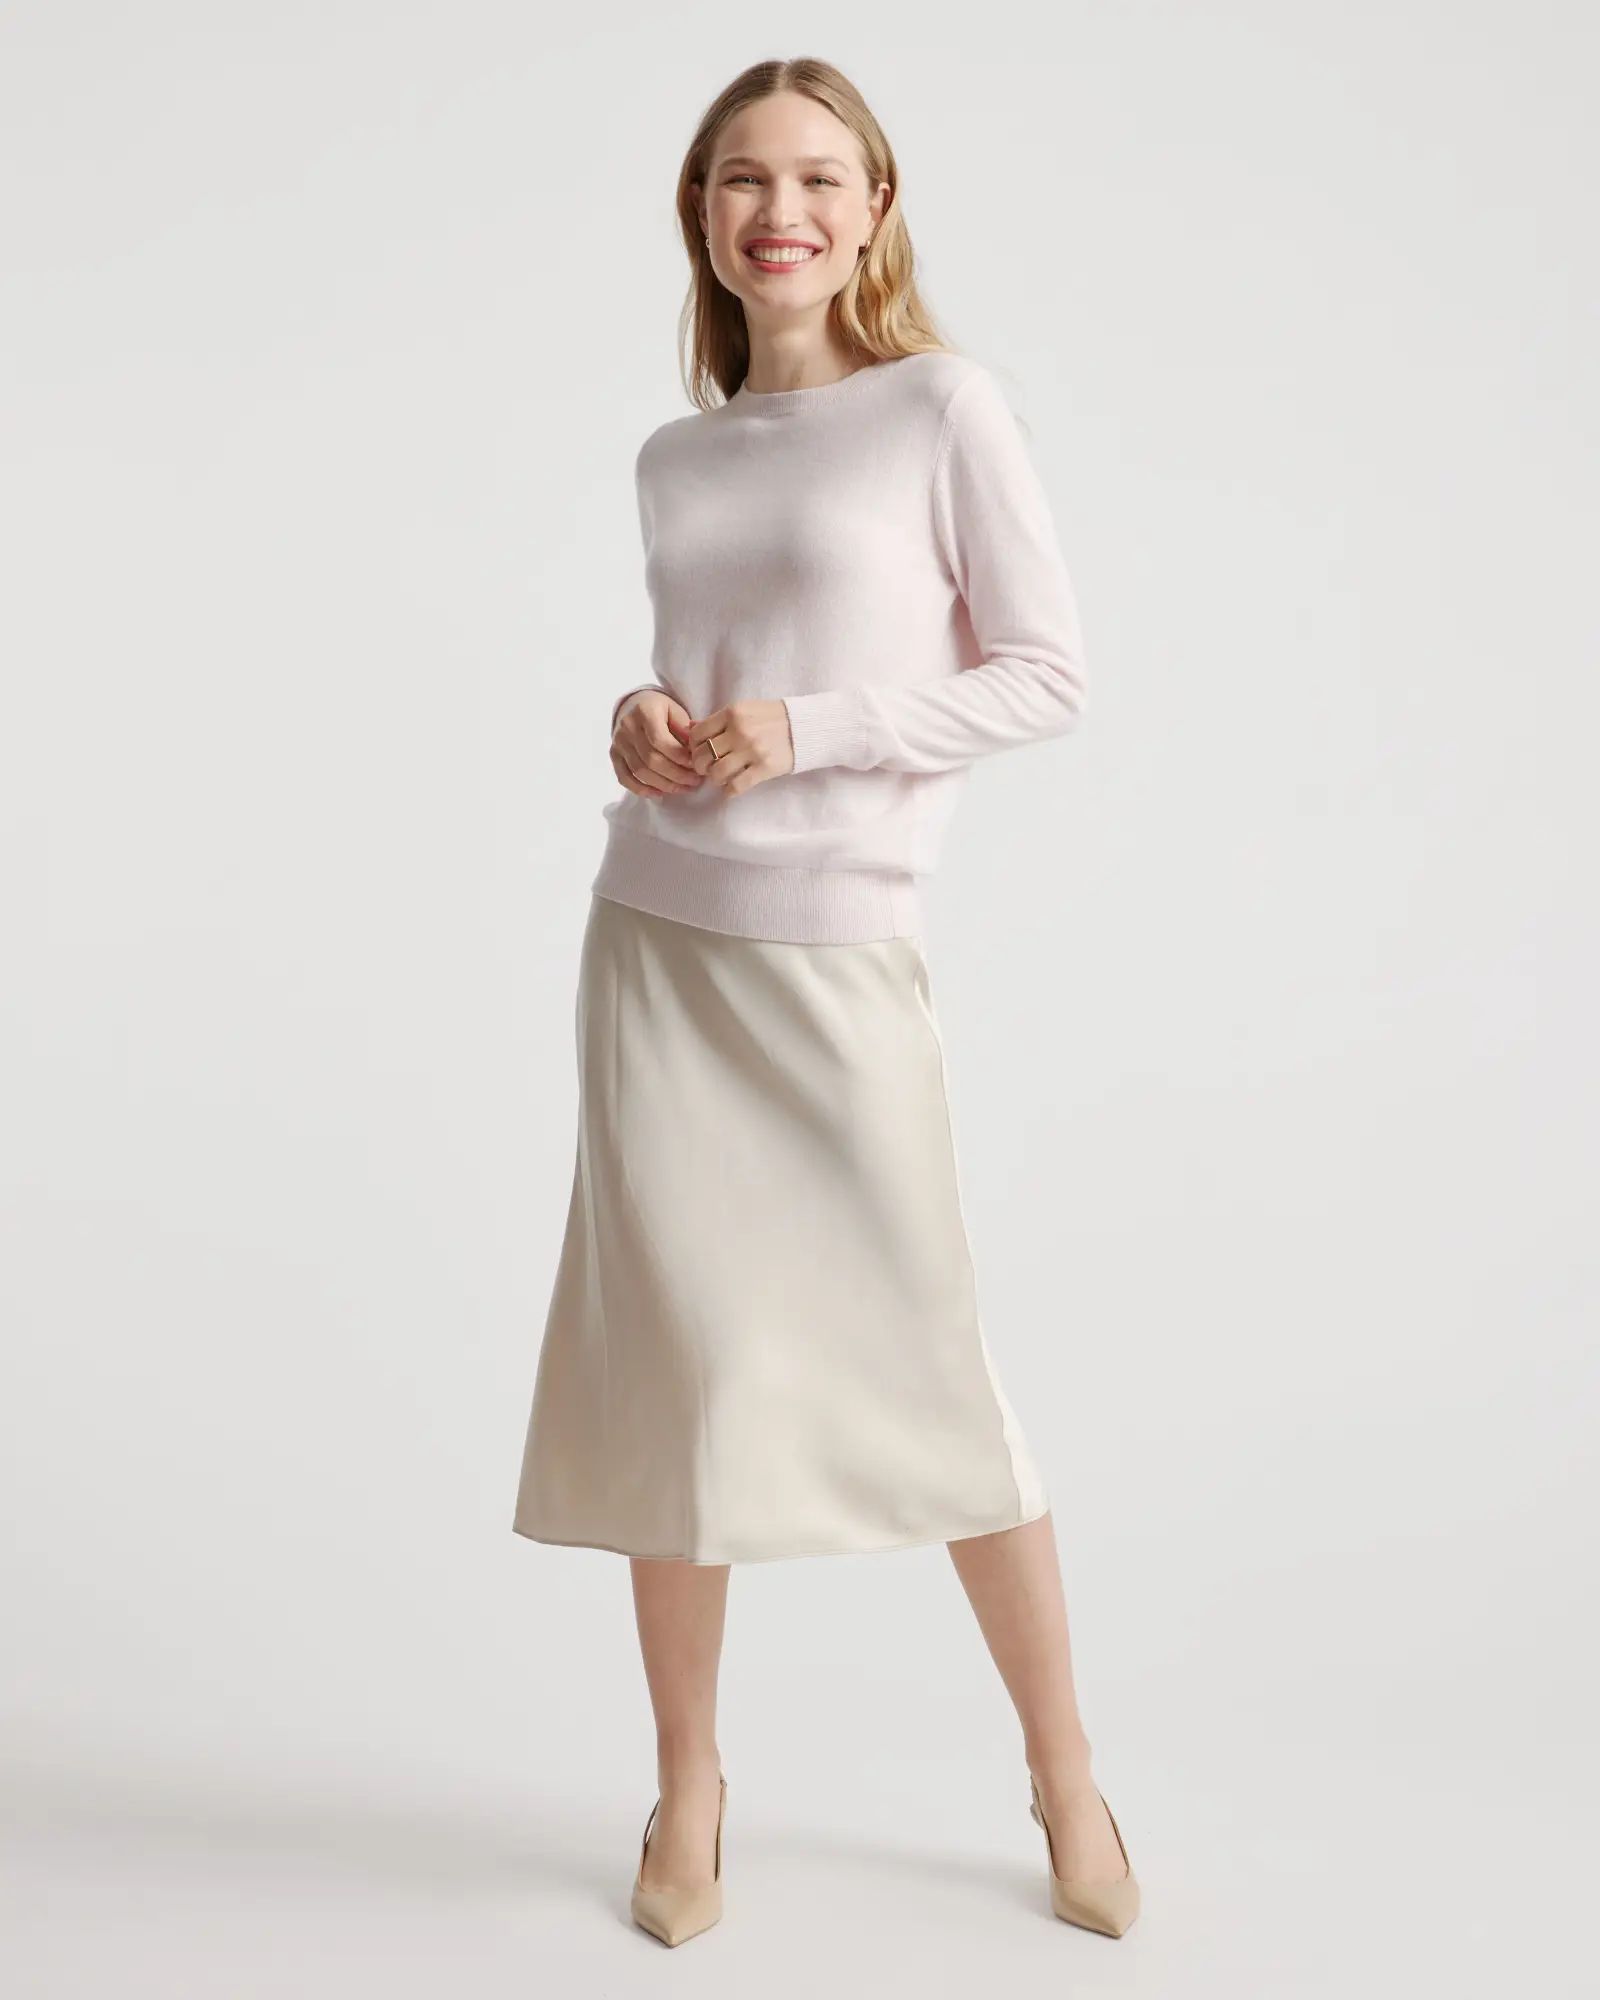 The $50 Cashmere Crewneck Sweater | Quince | Quince